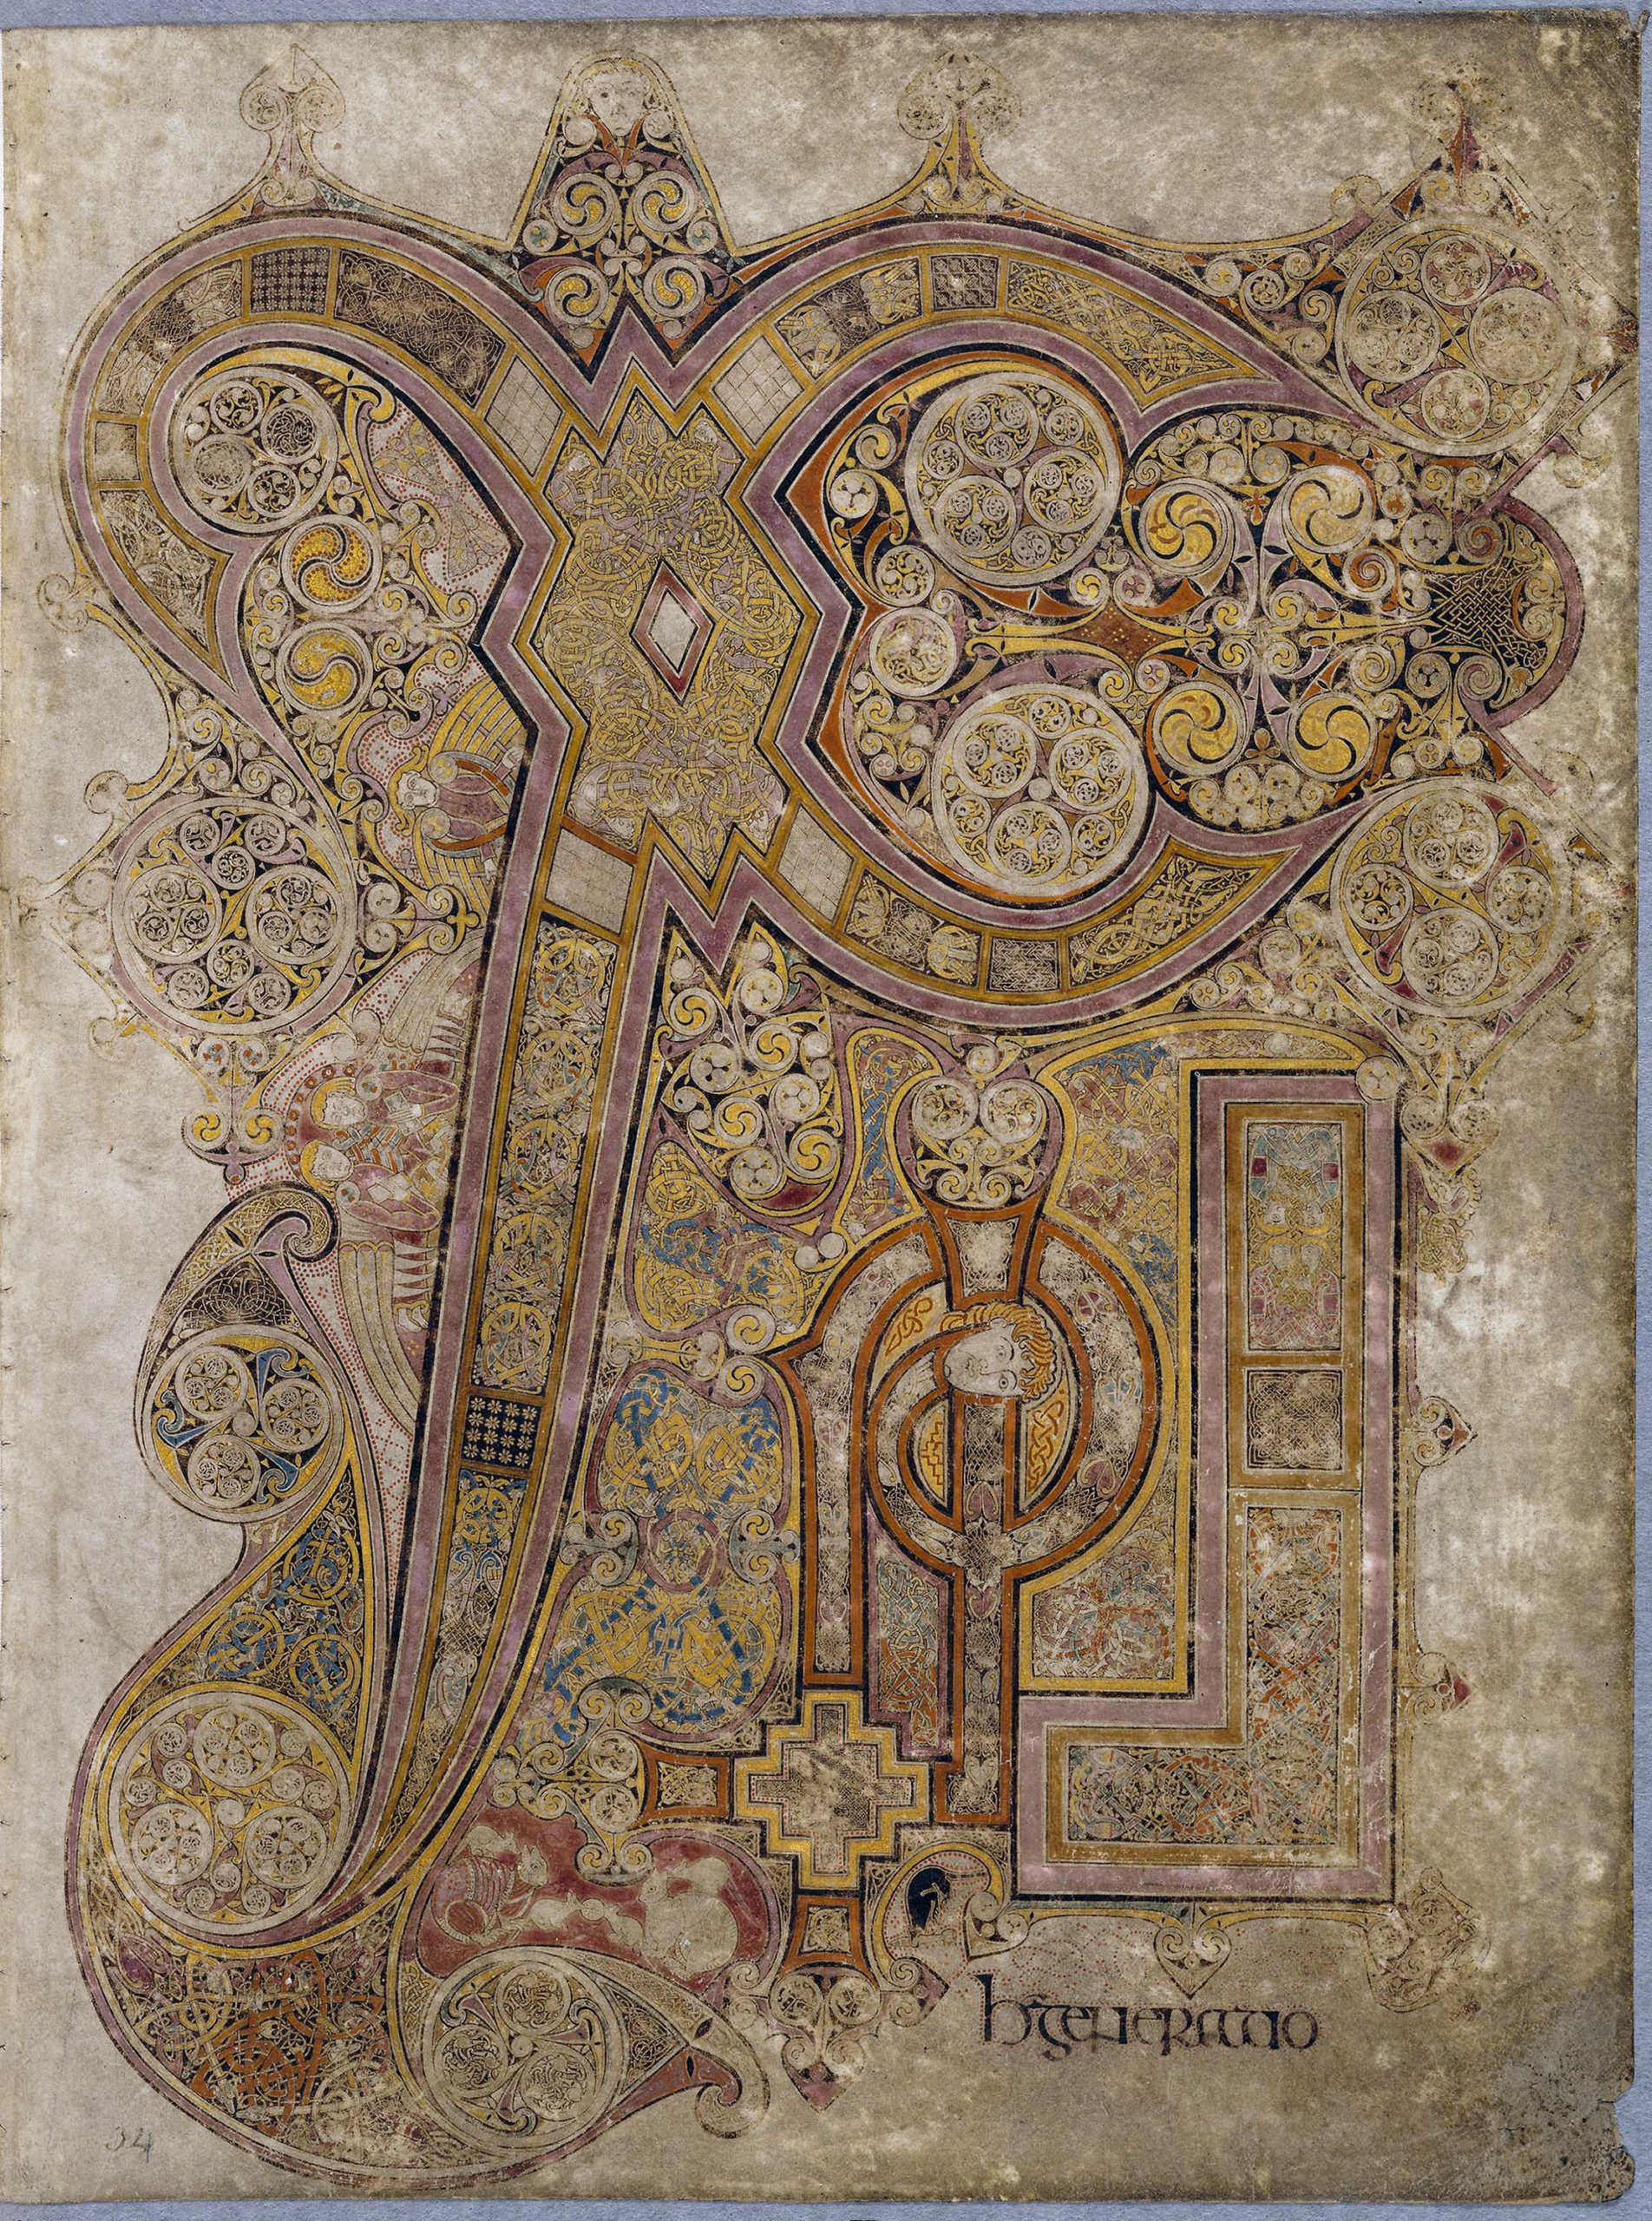 Chi Rho page, Book of Kells, c. 800, 340 vellum folios, 33.0 x 25.5 cm each (edges trimmed and gilded in the 19th century), MS 58 (Trinity College Library, Dublin)